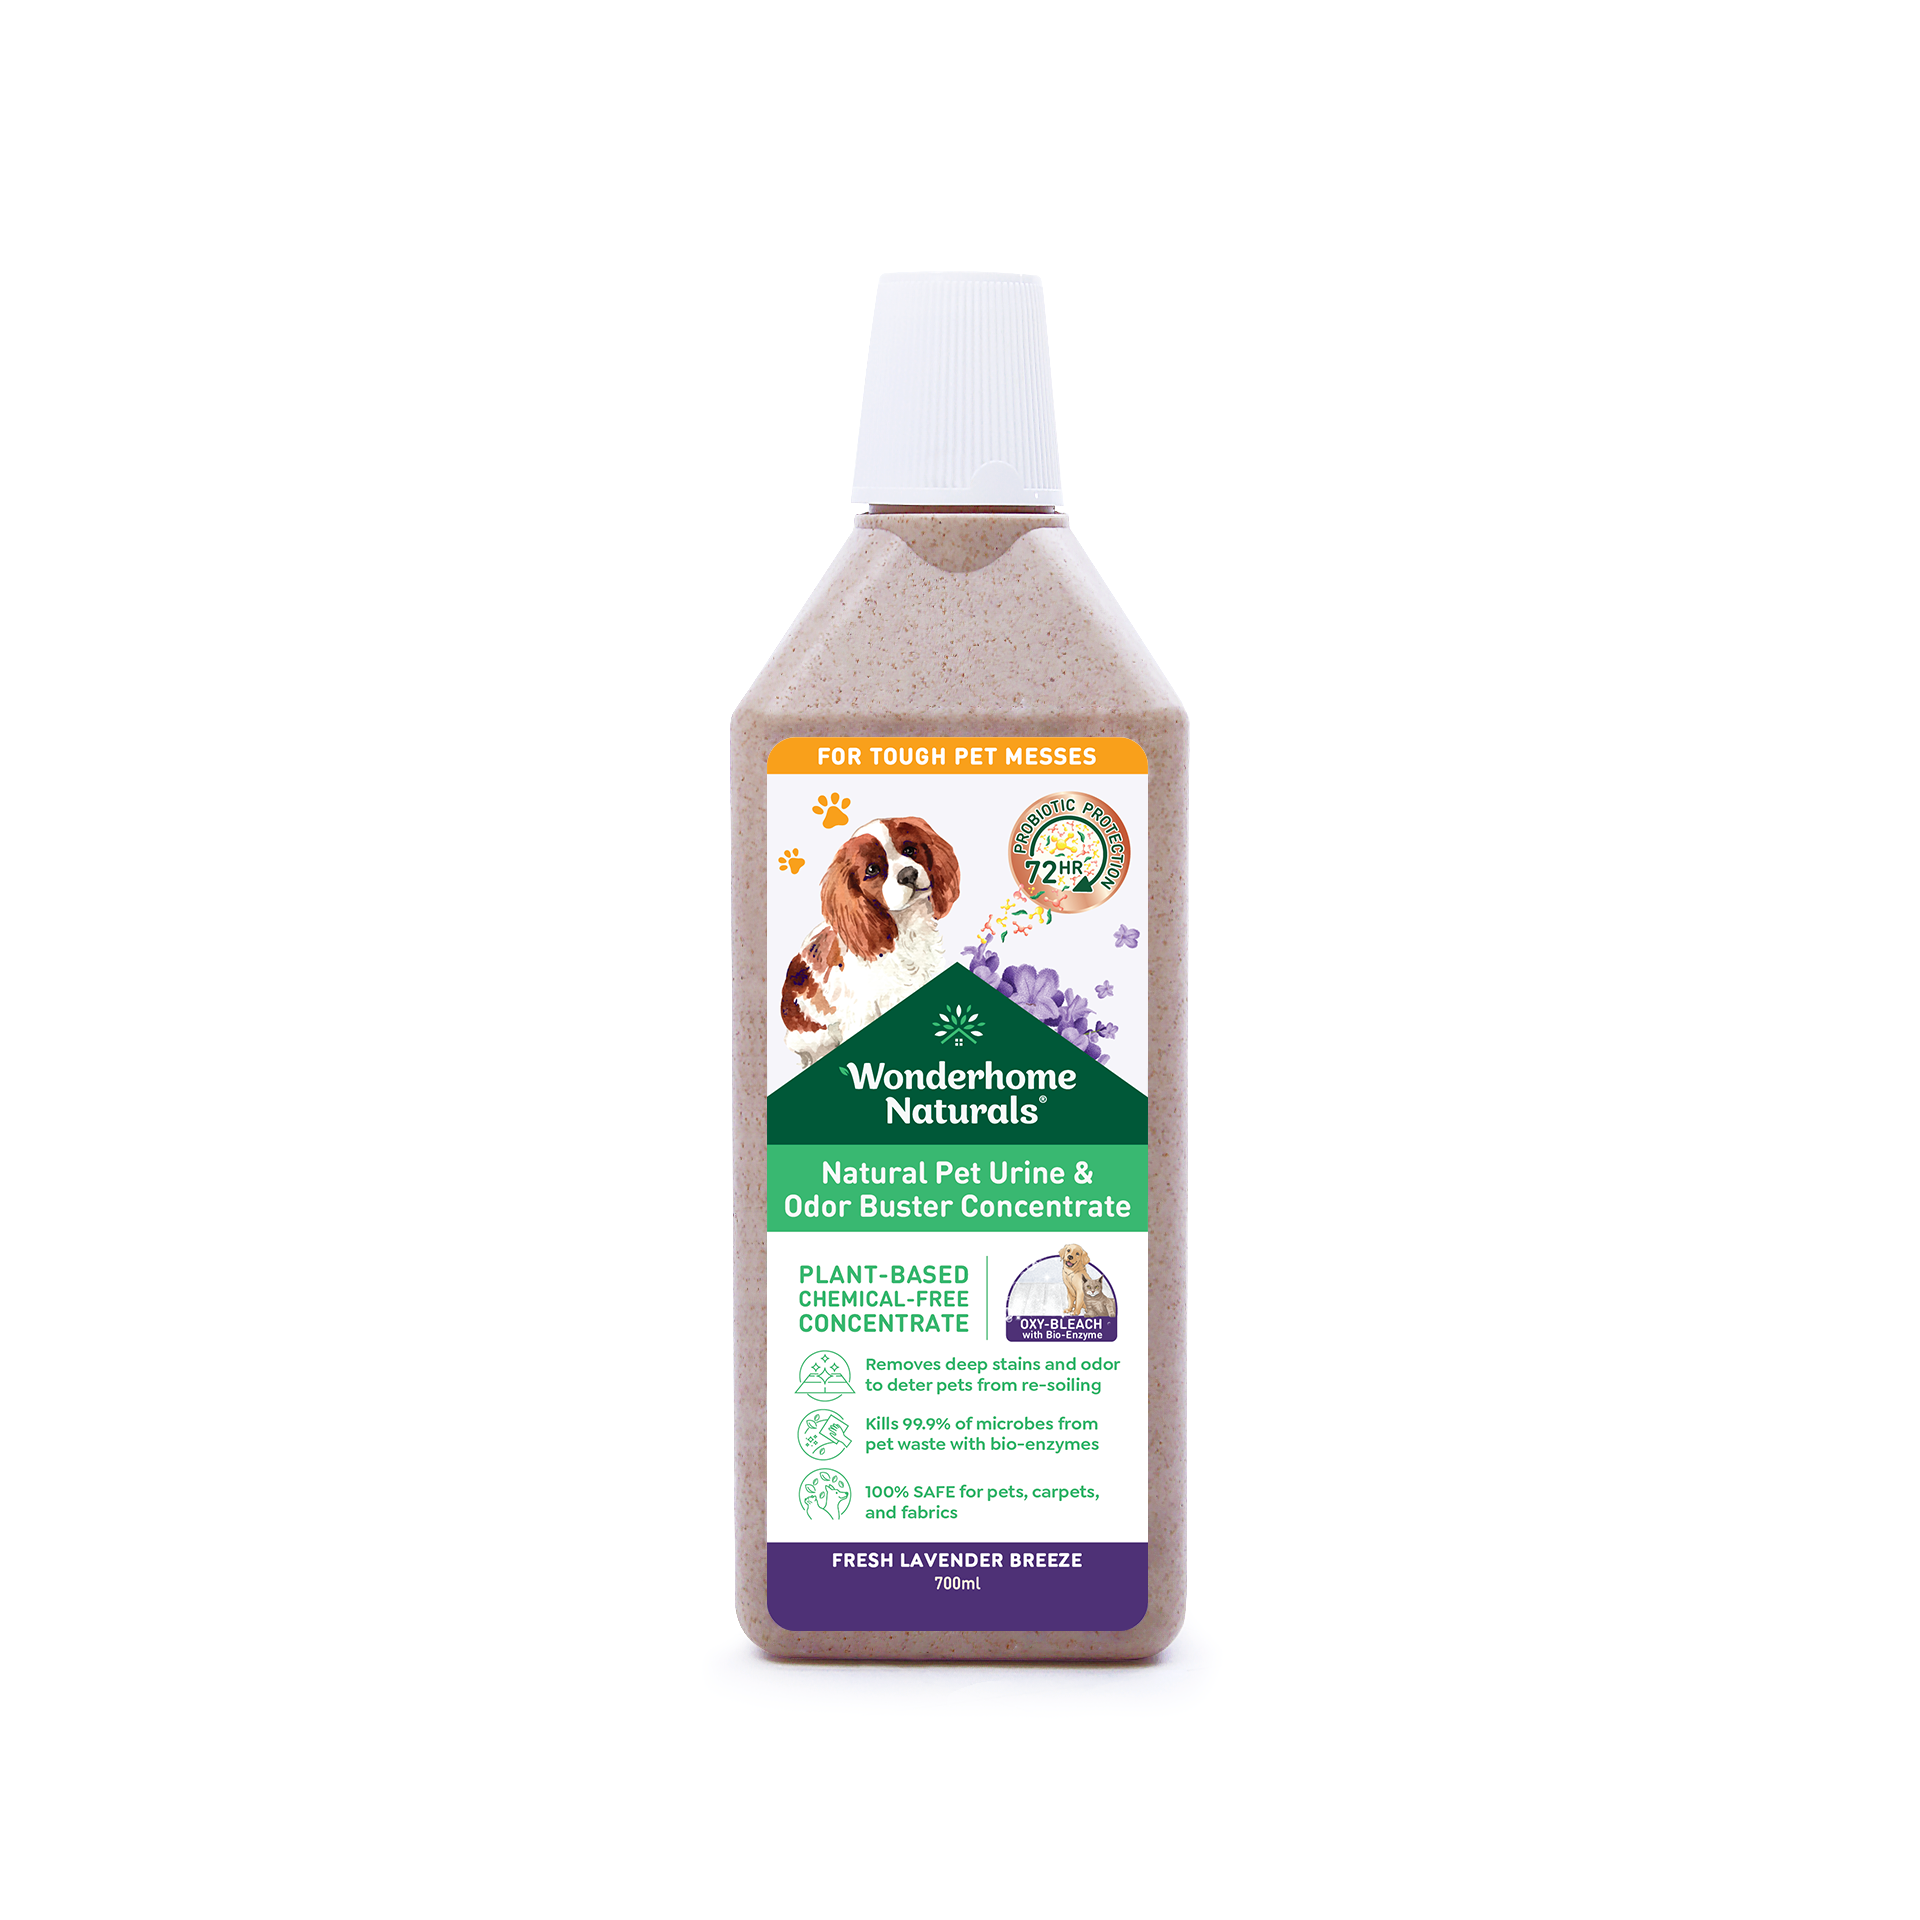 WONDERHOME NATURAL Natural Pet Urine Stain & Odor Buster Concentrate 700ml Fresh Lavender Breeze